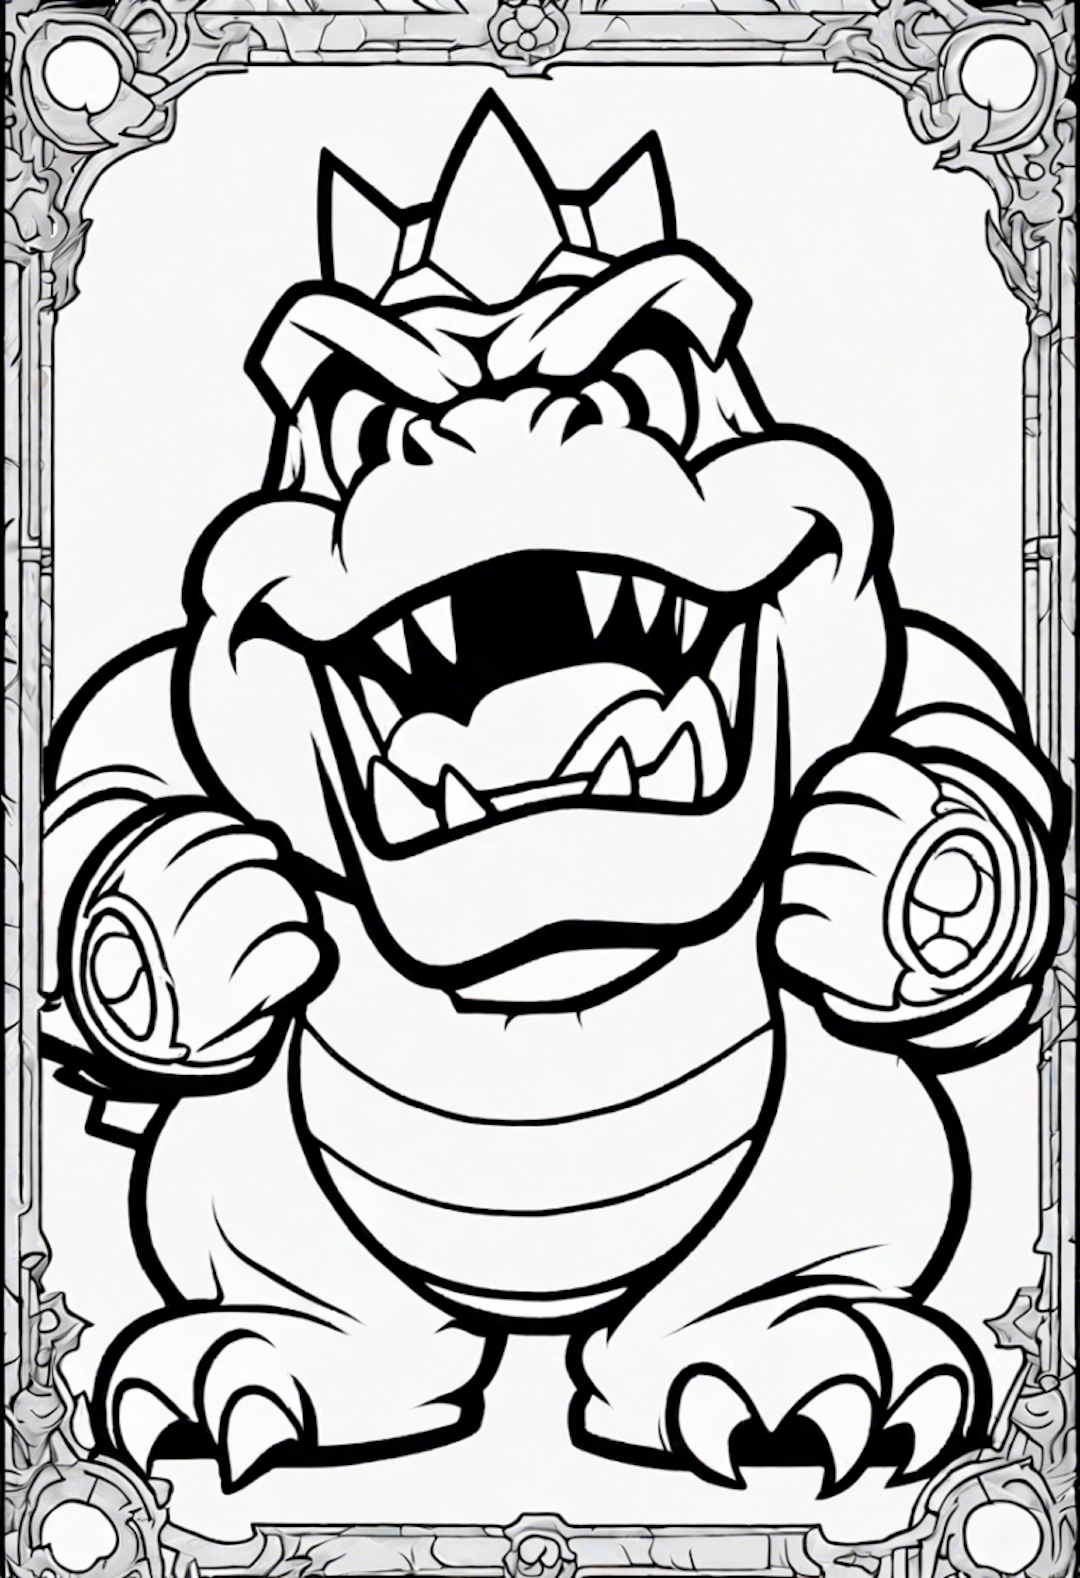 Bowser’s Mighty Roar Coloring Page coloring pages